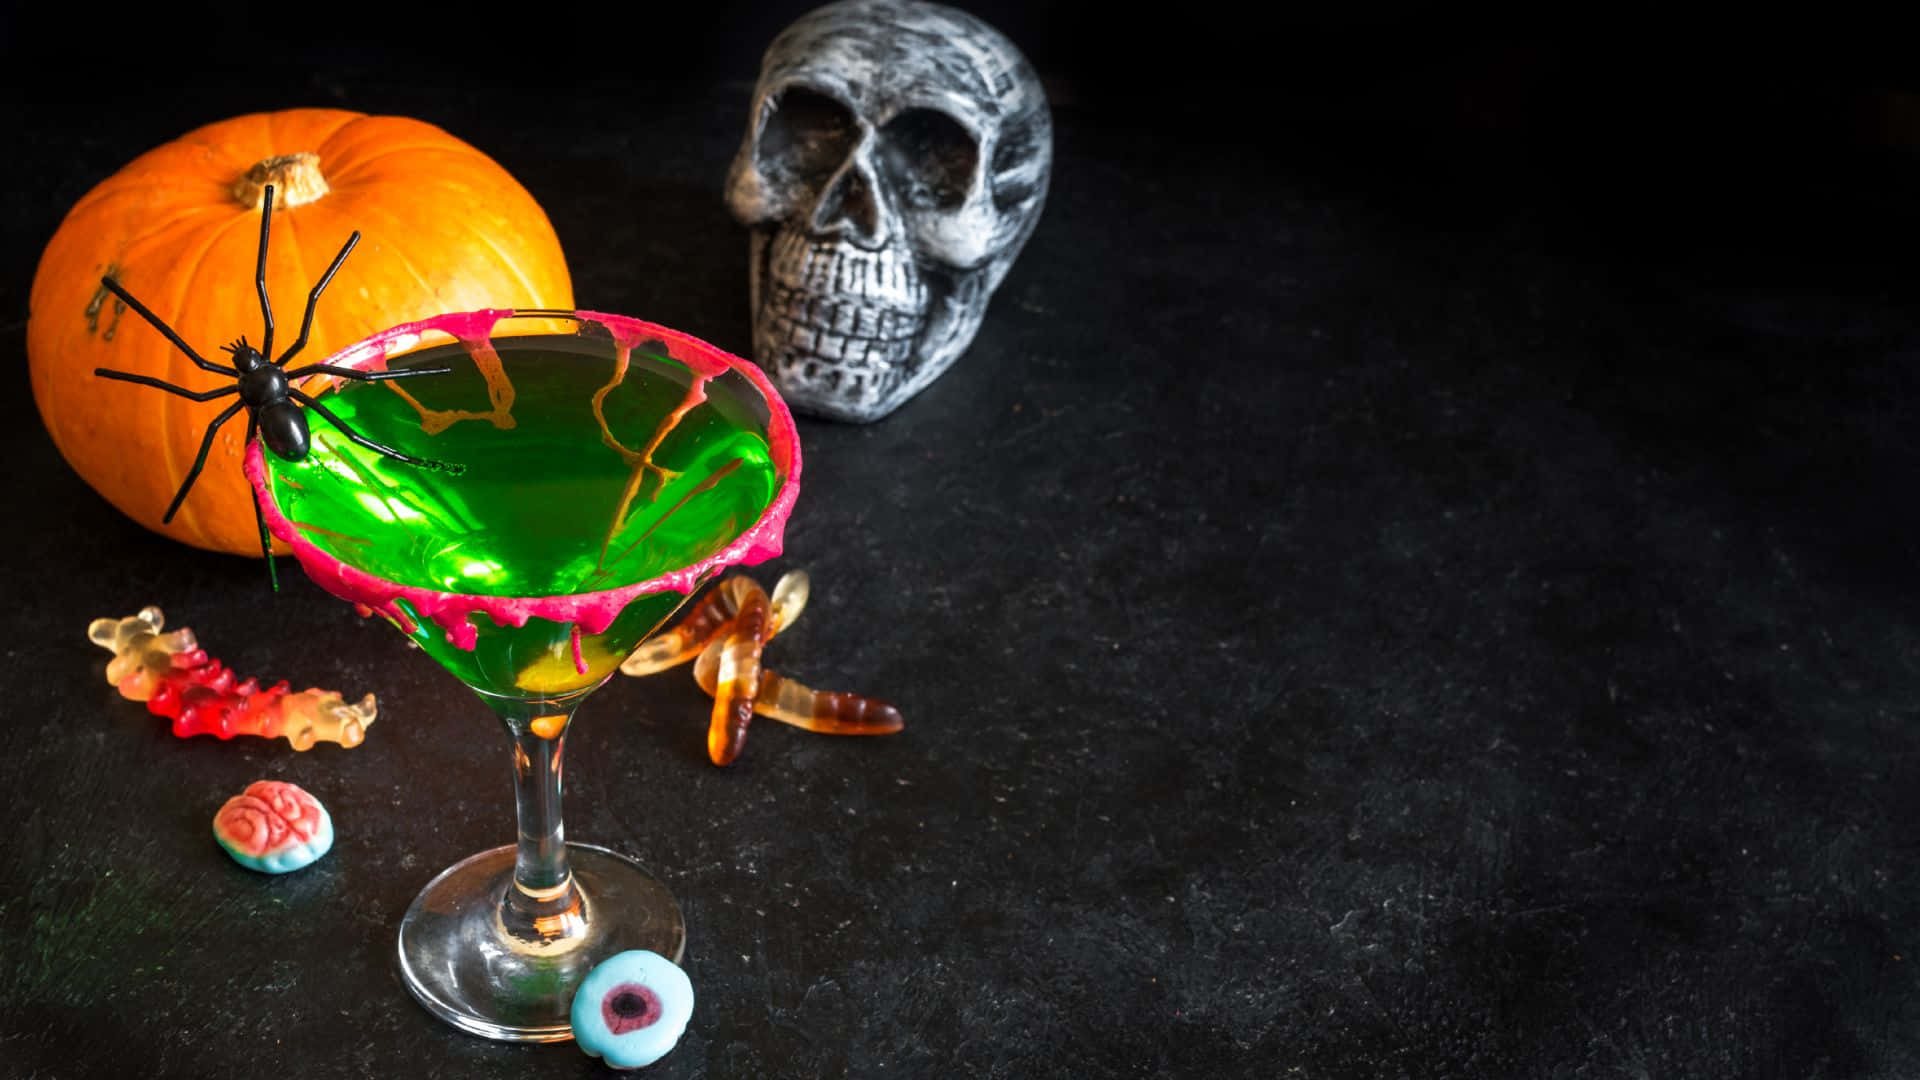 "Grab your spookiest glass for some spooky cocktails!" Wallpaper